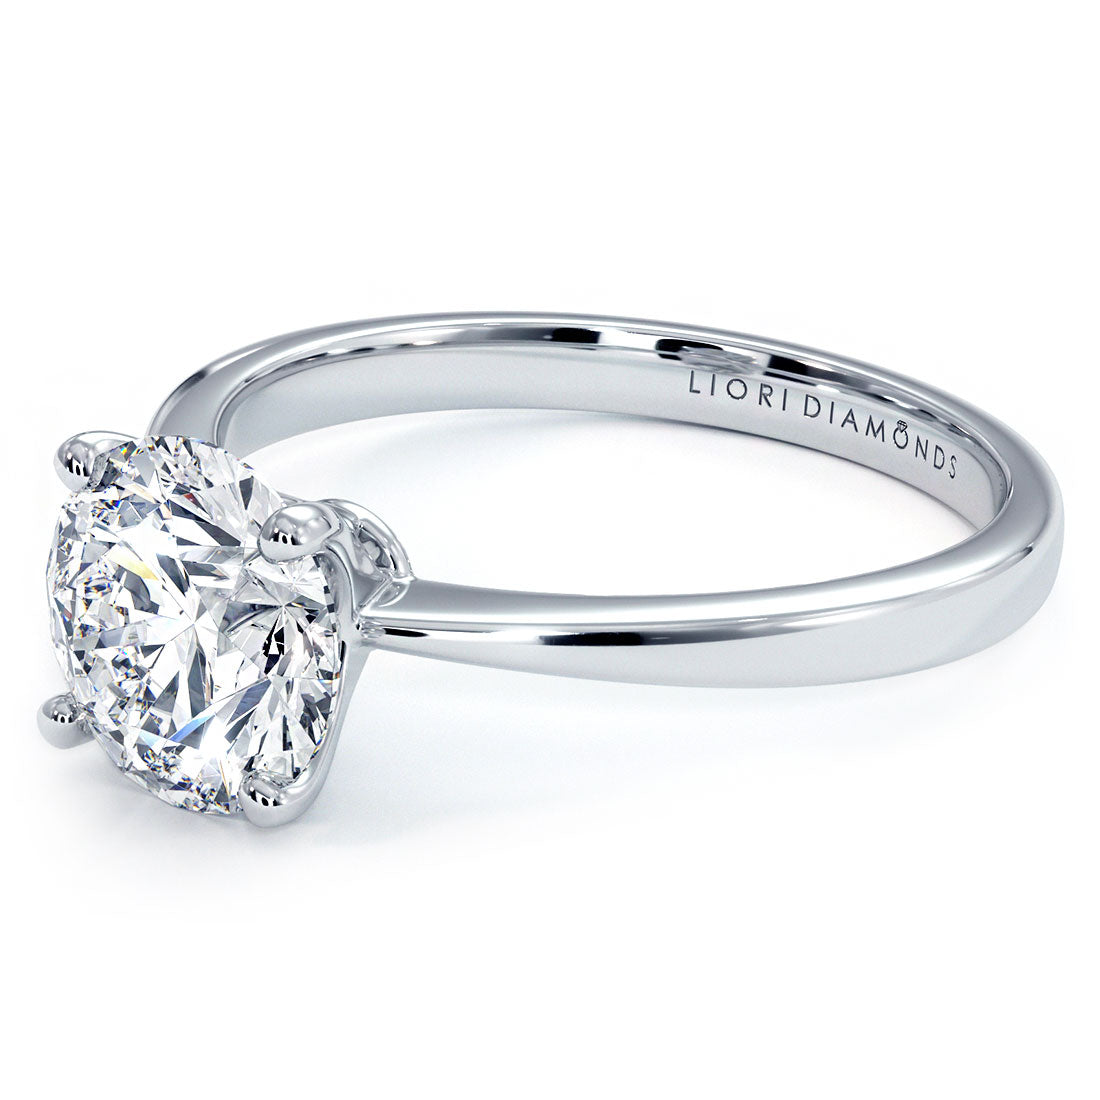 1.50ct Round Brilliant Petite Tapered 4 Prong Solitaire Lab Grown Diamond Engagement Ring set in 14k White Gold